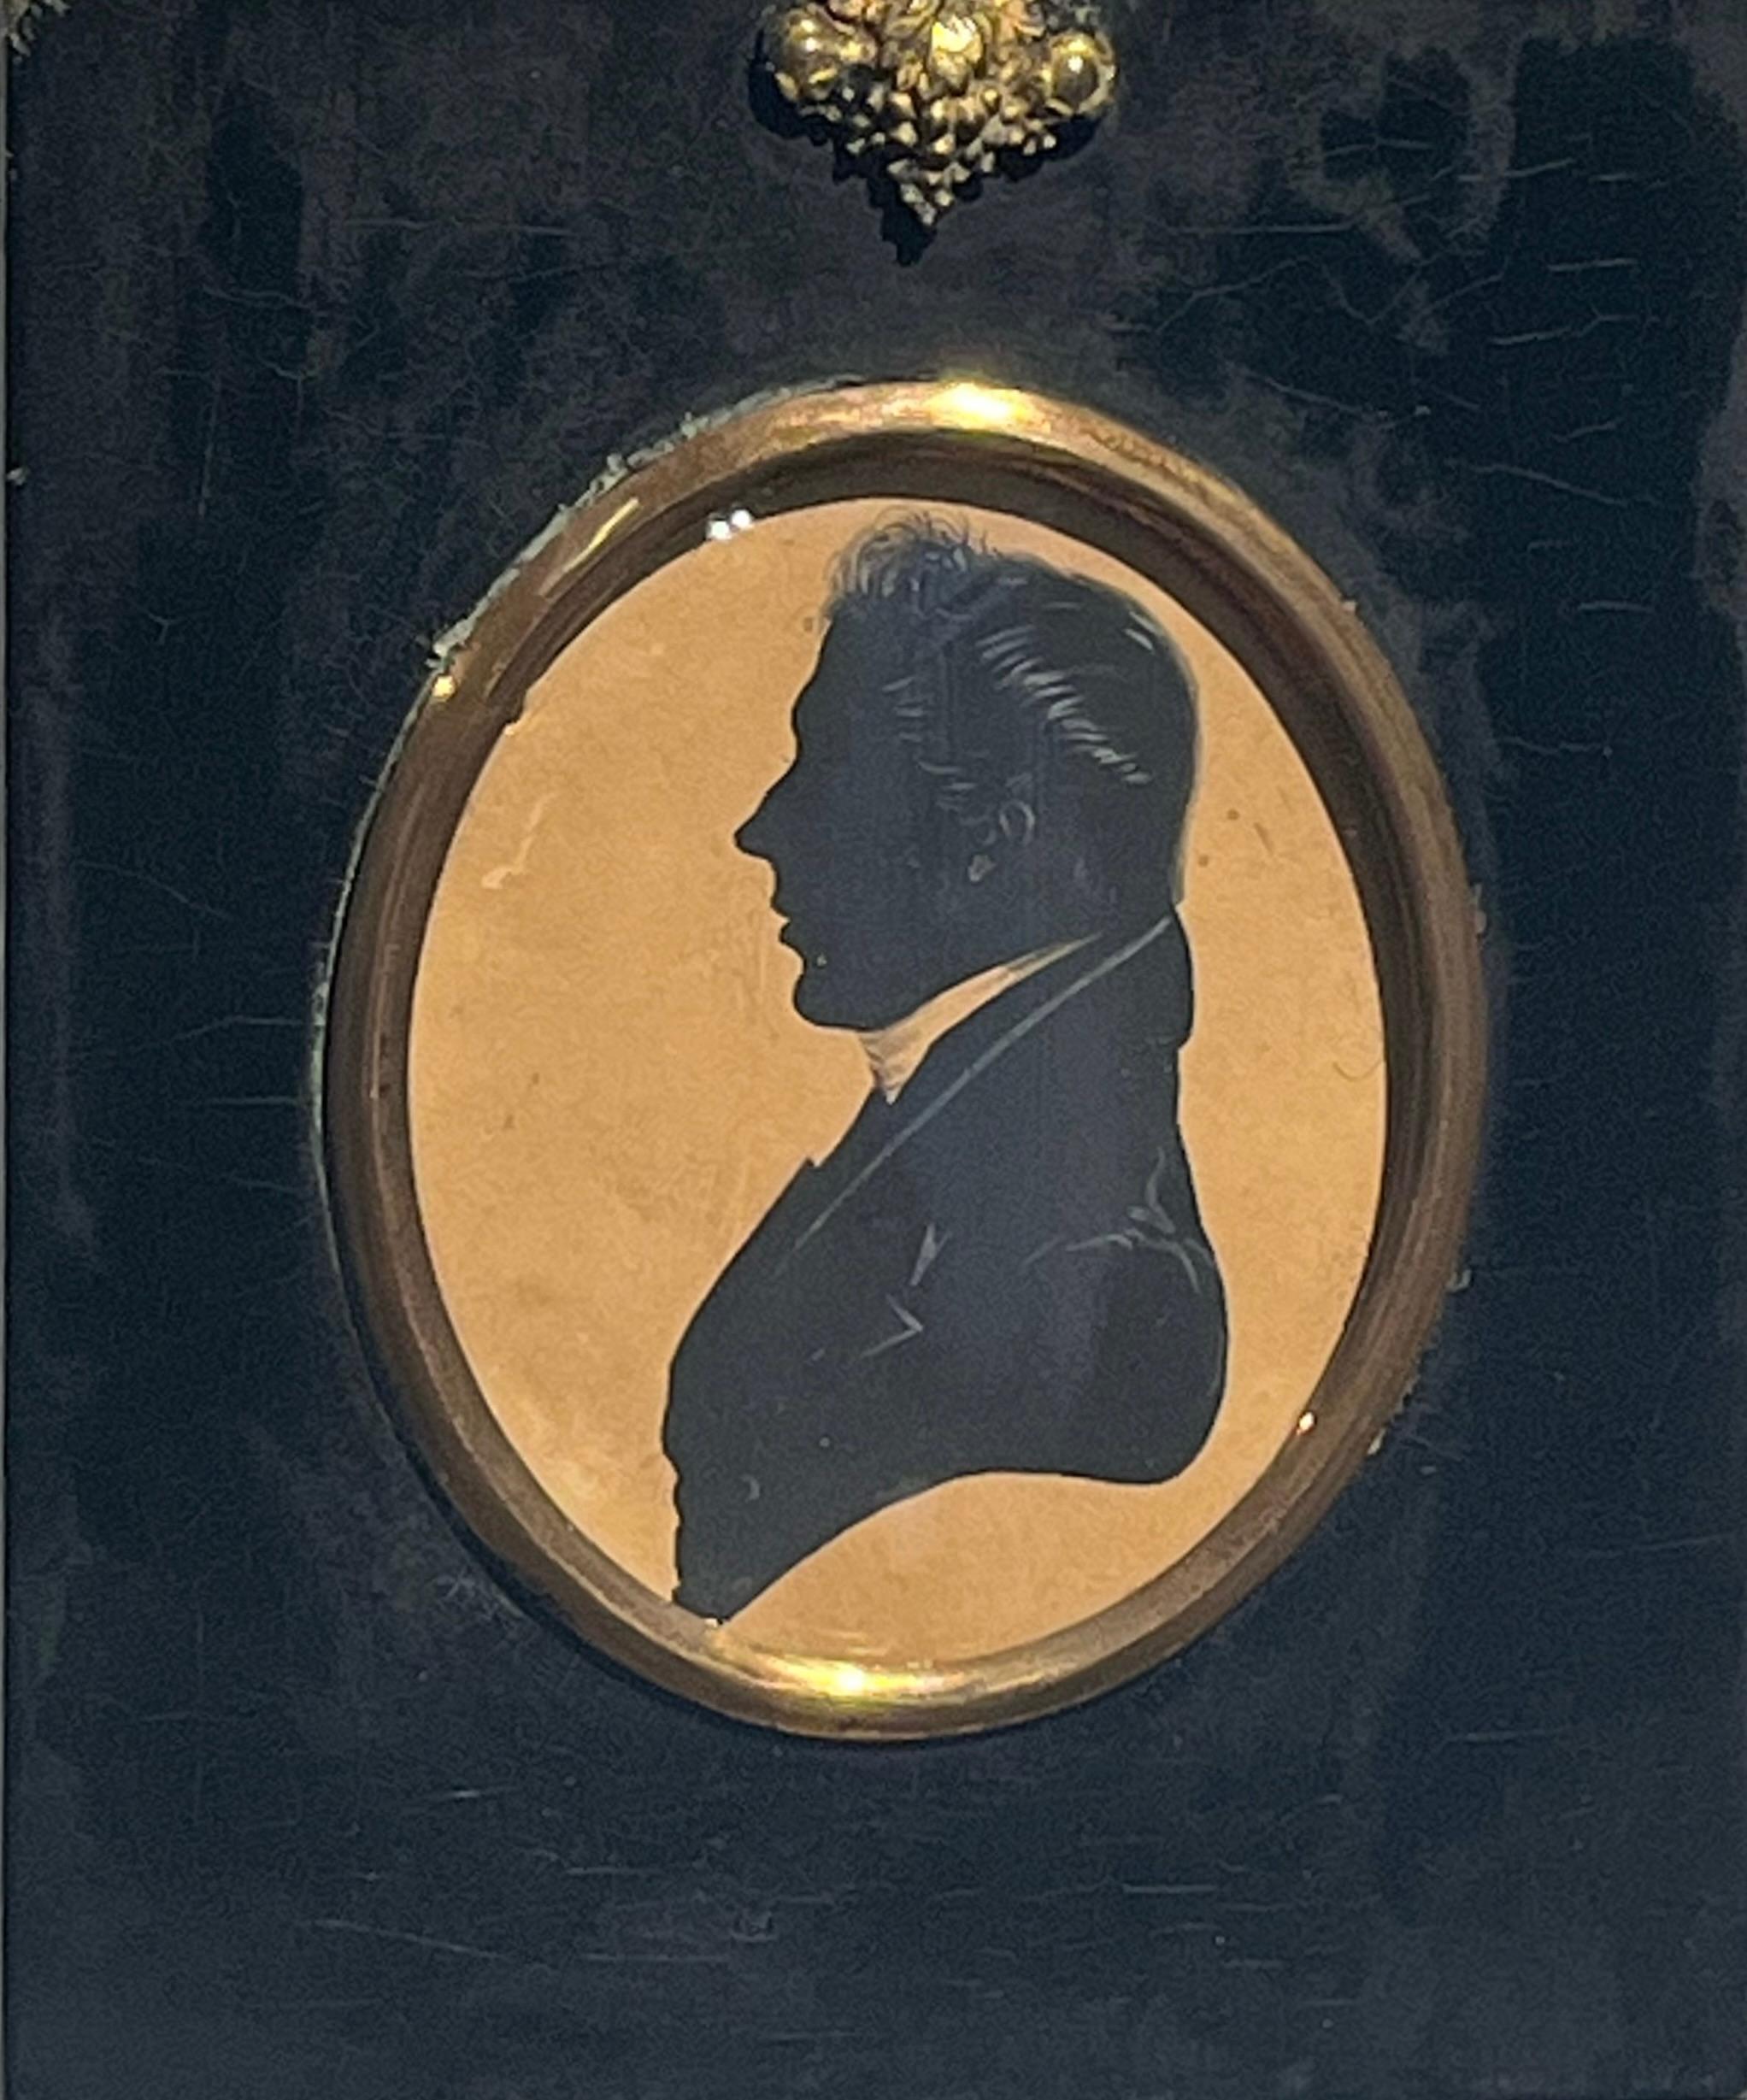 A finely detailed silhouette of a Victorian clergyman.

Frederick Frith (1819-1871)
The Reverend James Metze, bust length, turned to the right, wearing coat and cravat
Inscribed to the reverse with sitter's details
watercolour on paper
2¾ x 2¼